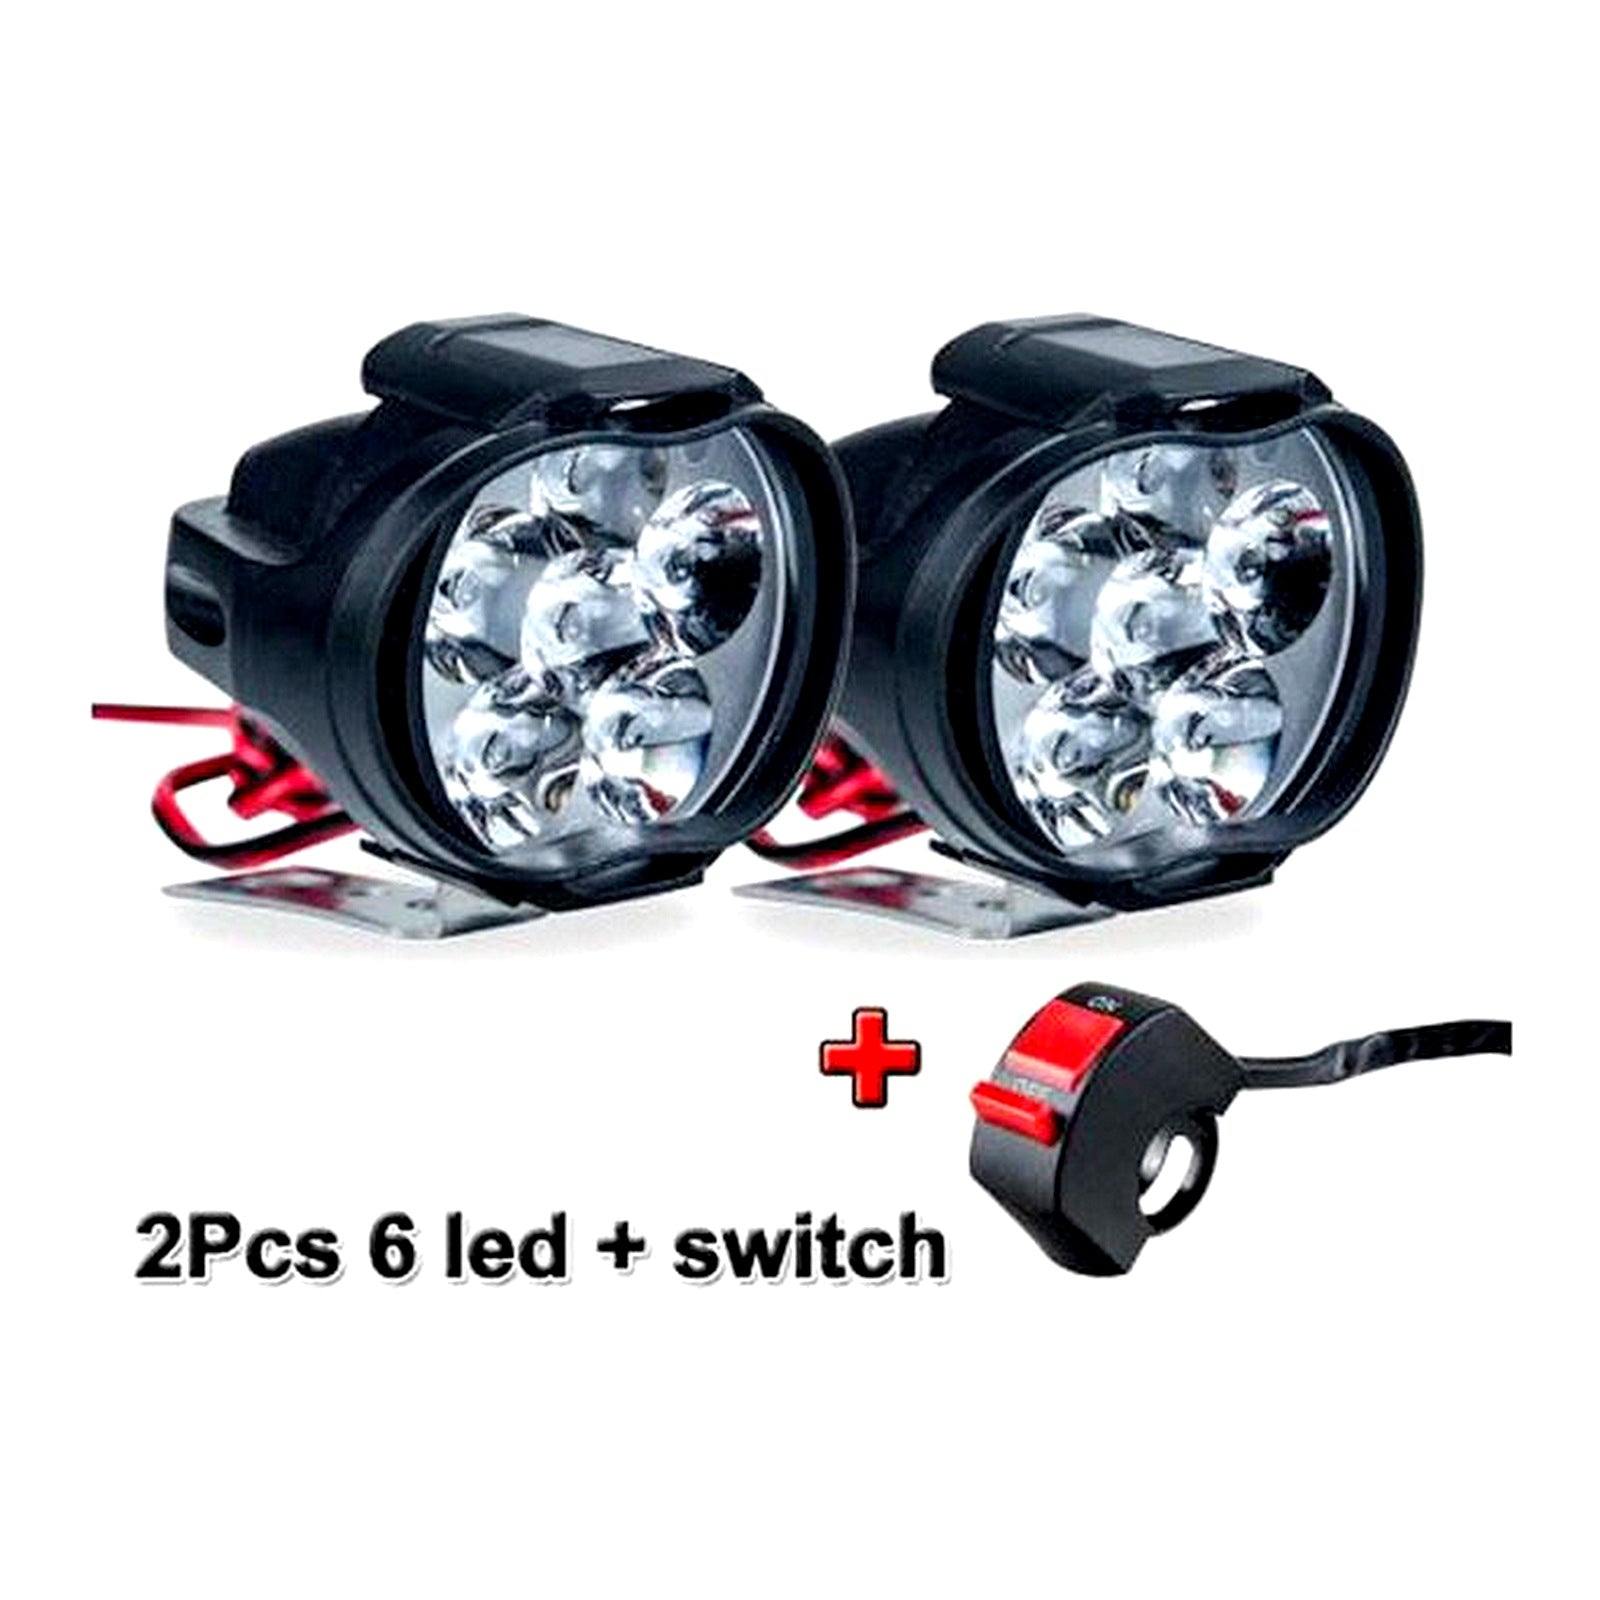 LED HEAD LIGHTS ASSEMBLY 2 PIECES FOR MOTORCYCLE